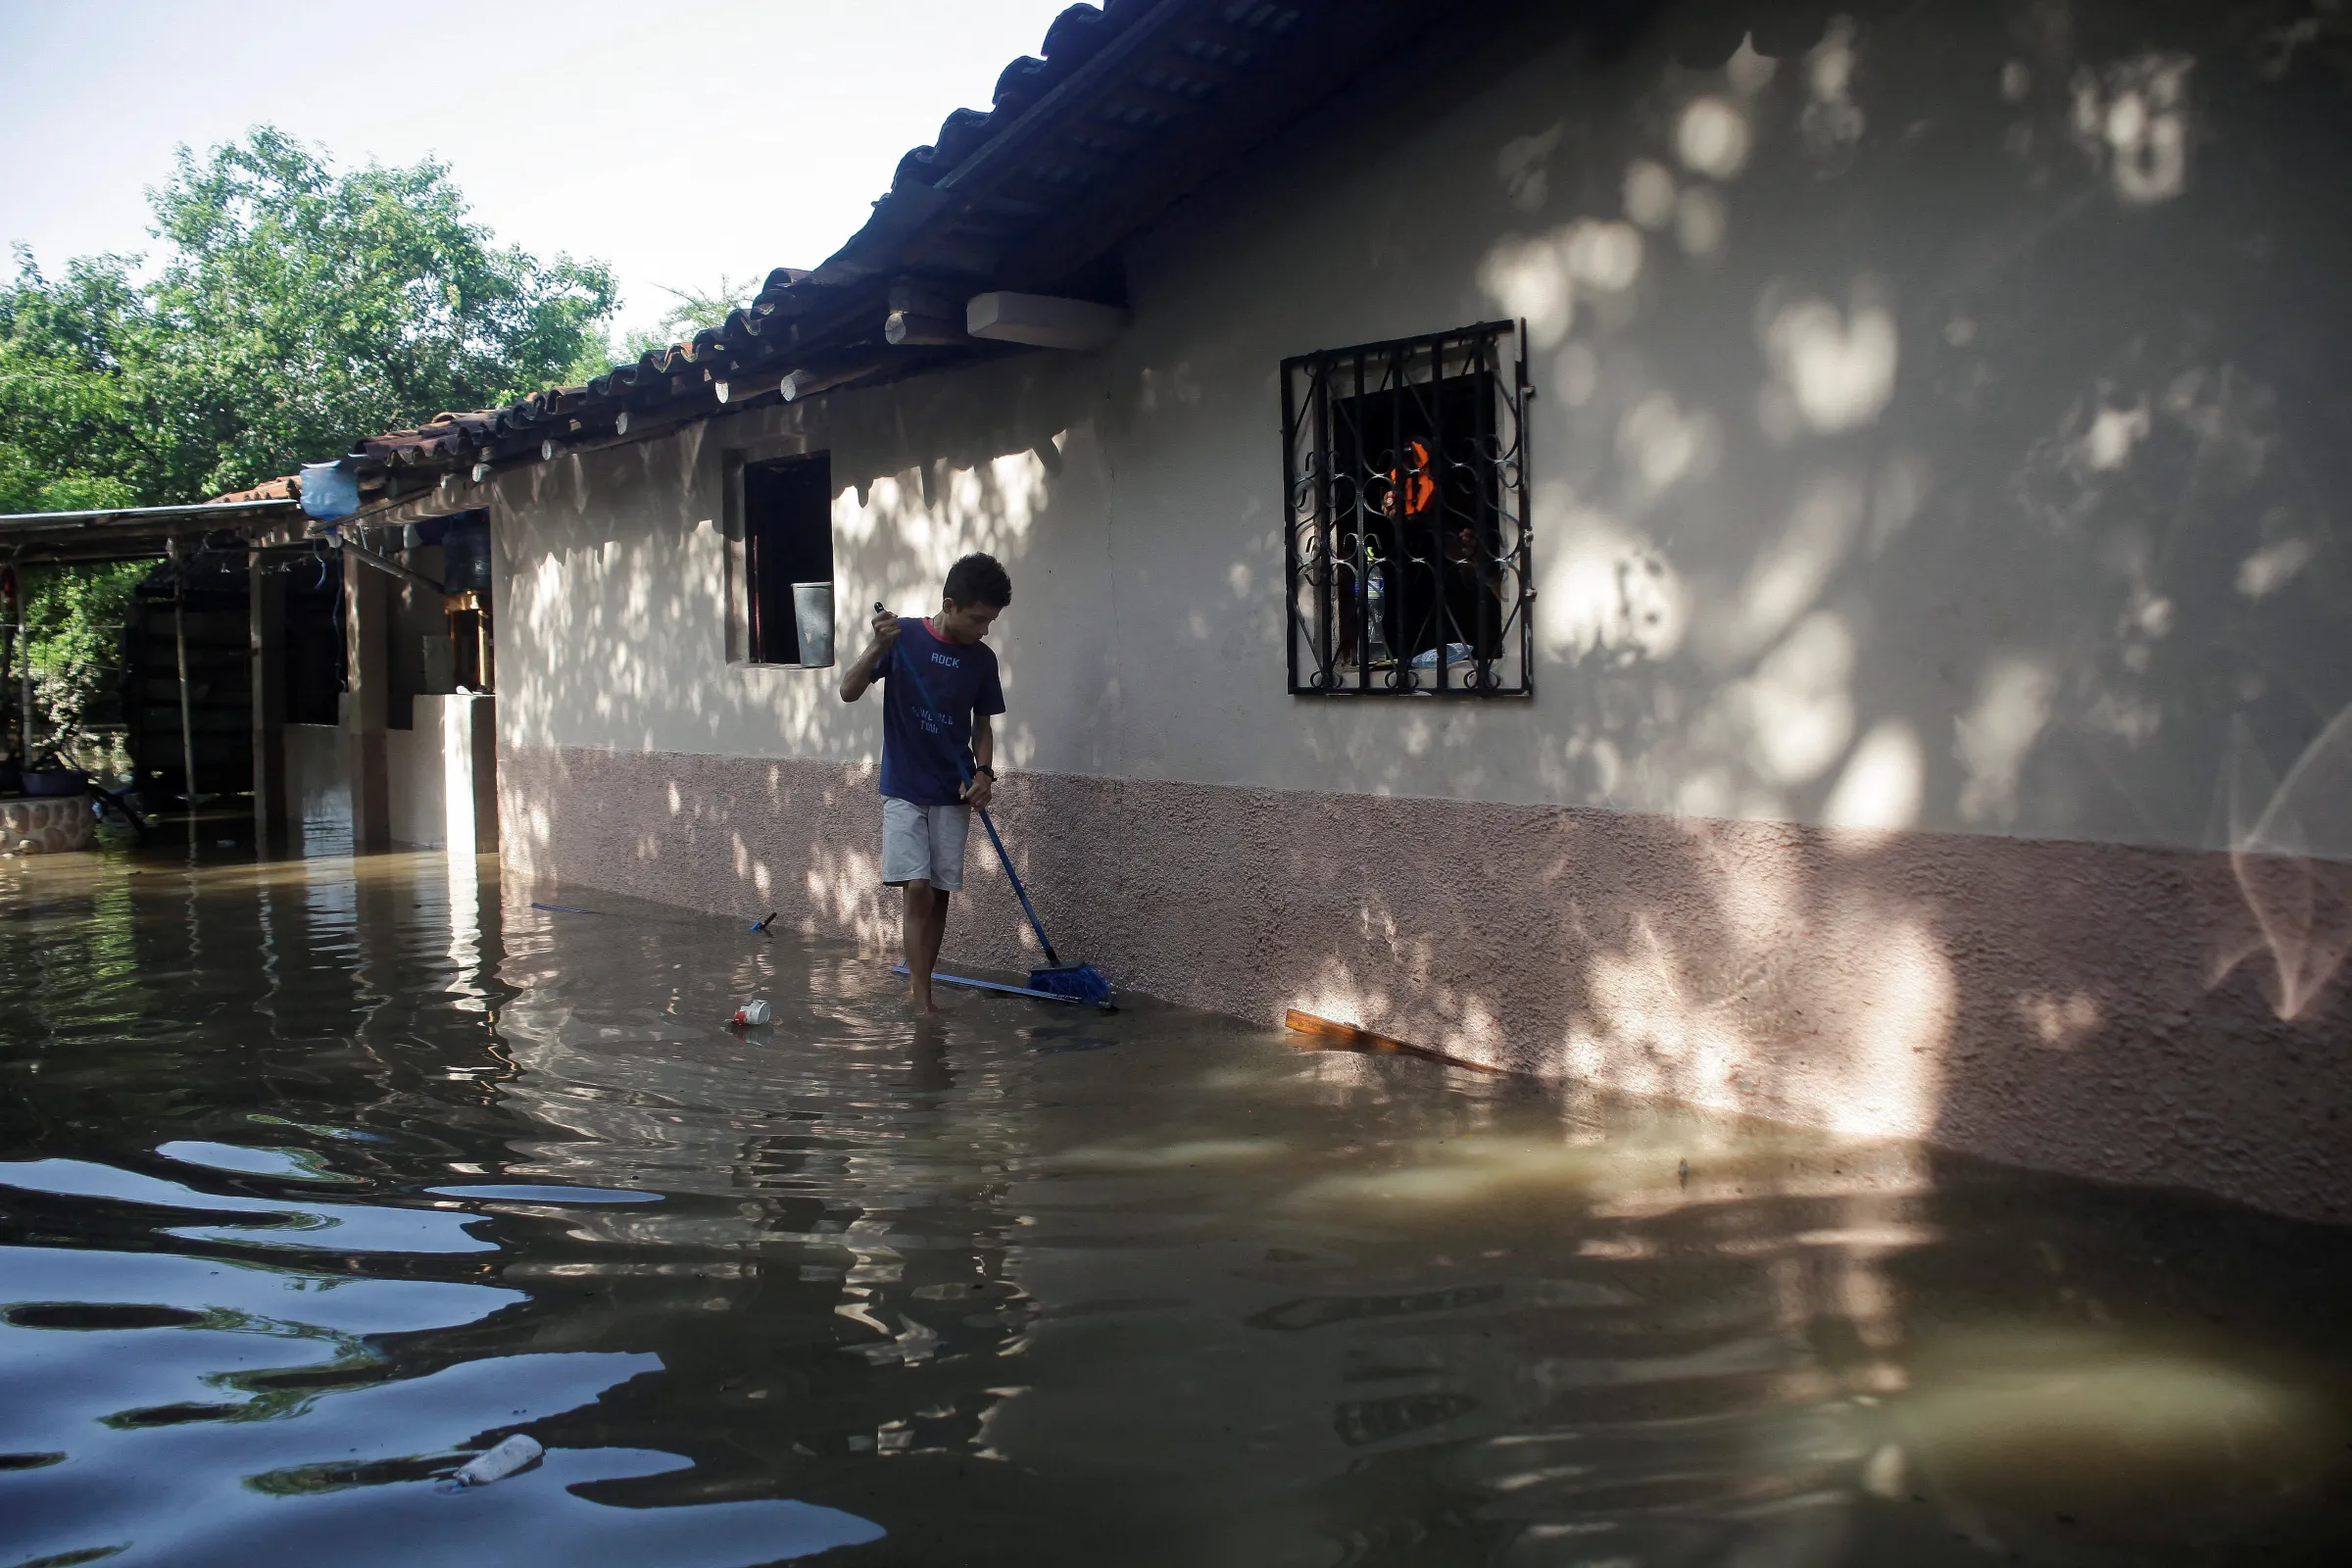 A young man uses a broom near a flooded house after the impact of tropical storm Julia in the department of Valle, Honduras October 11, 2022. REUTERS/Fredy Rodriguez